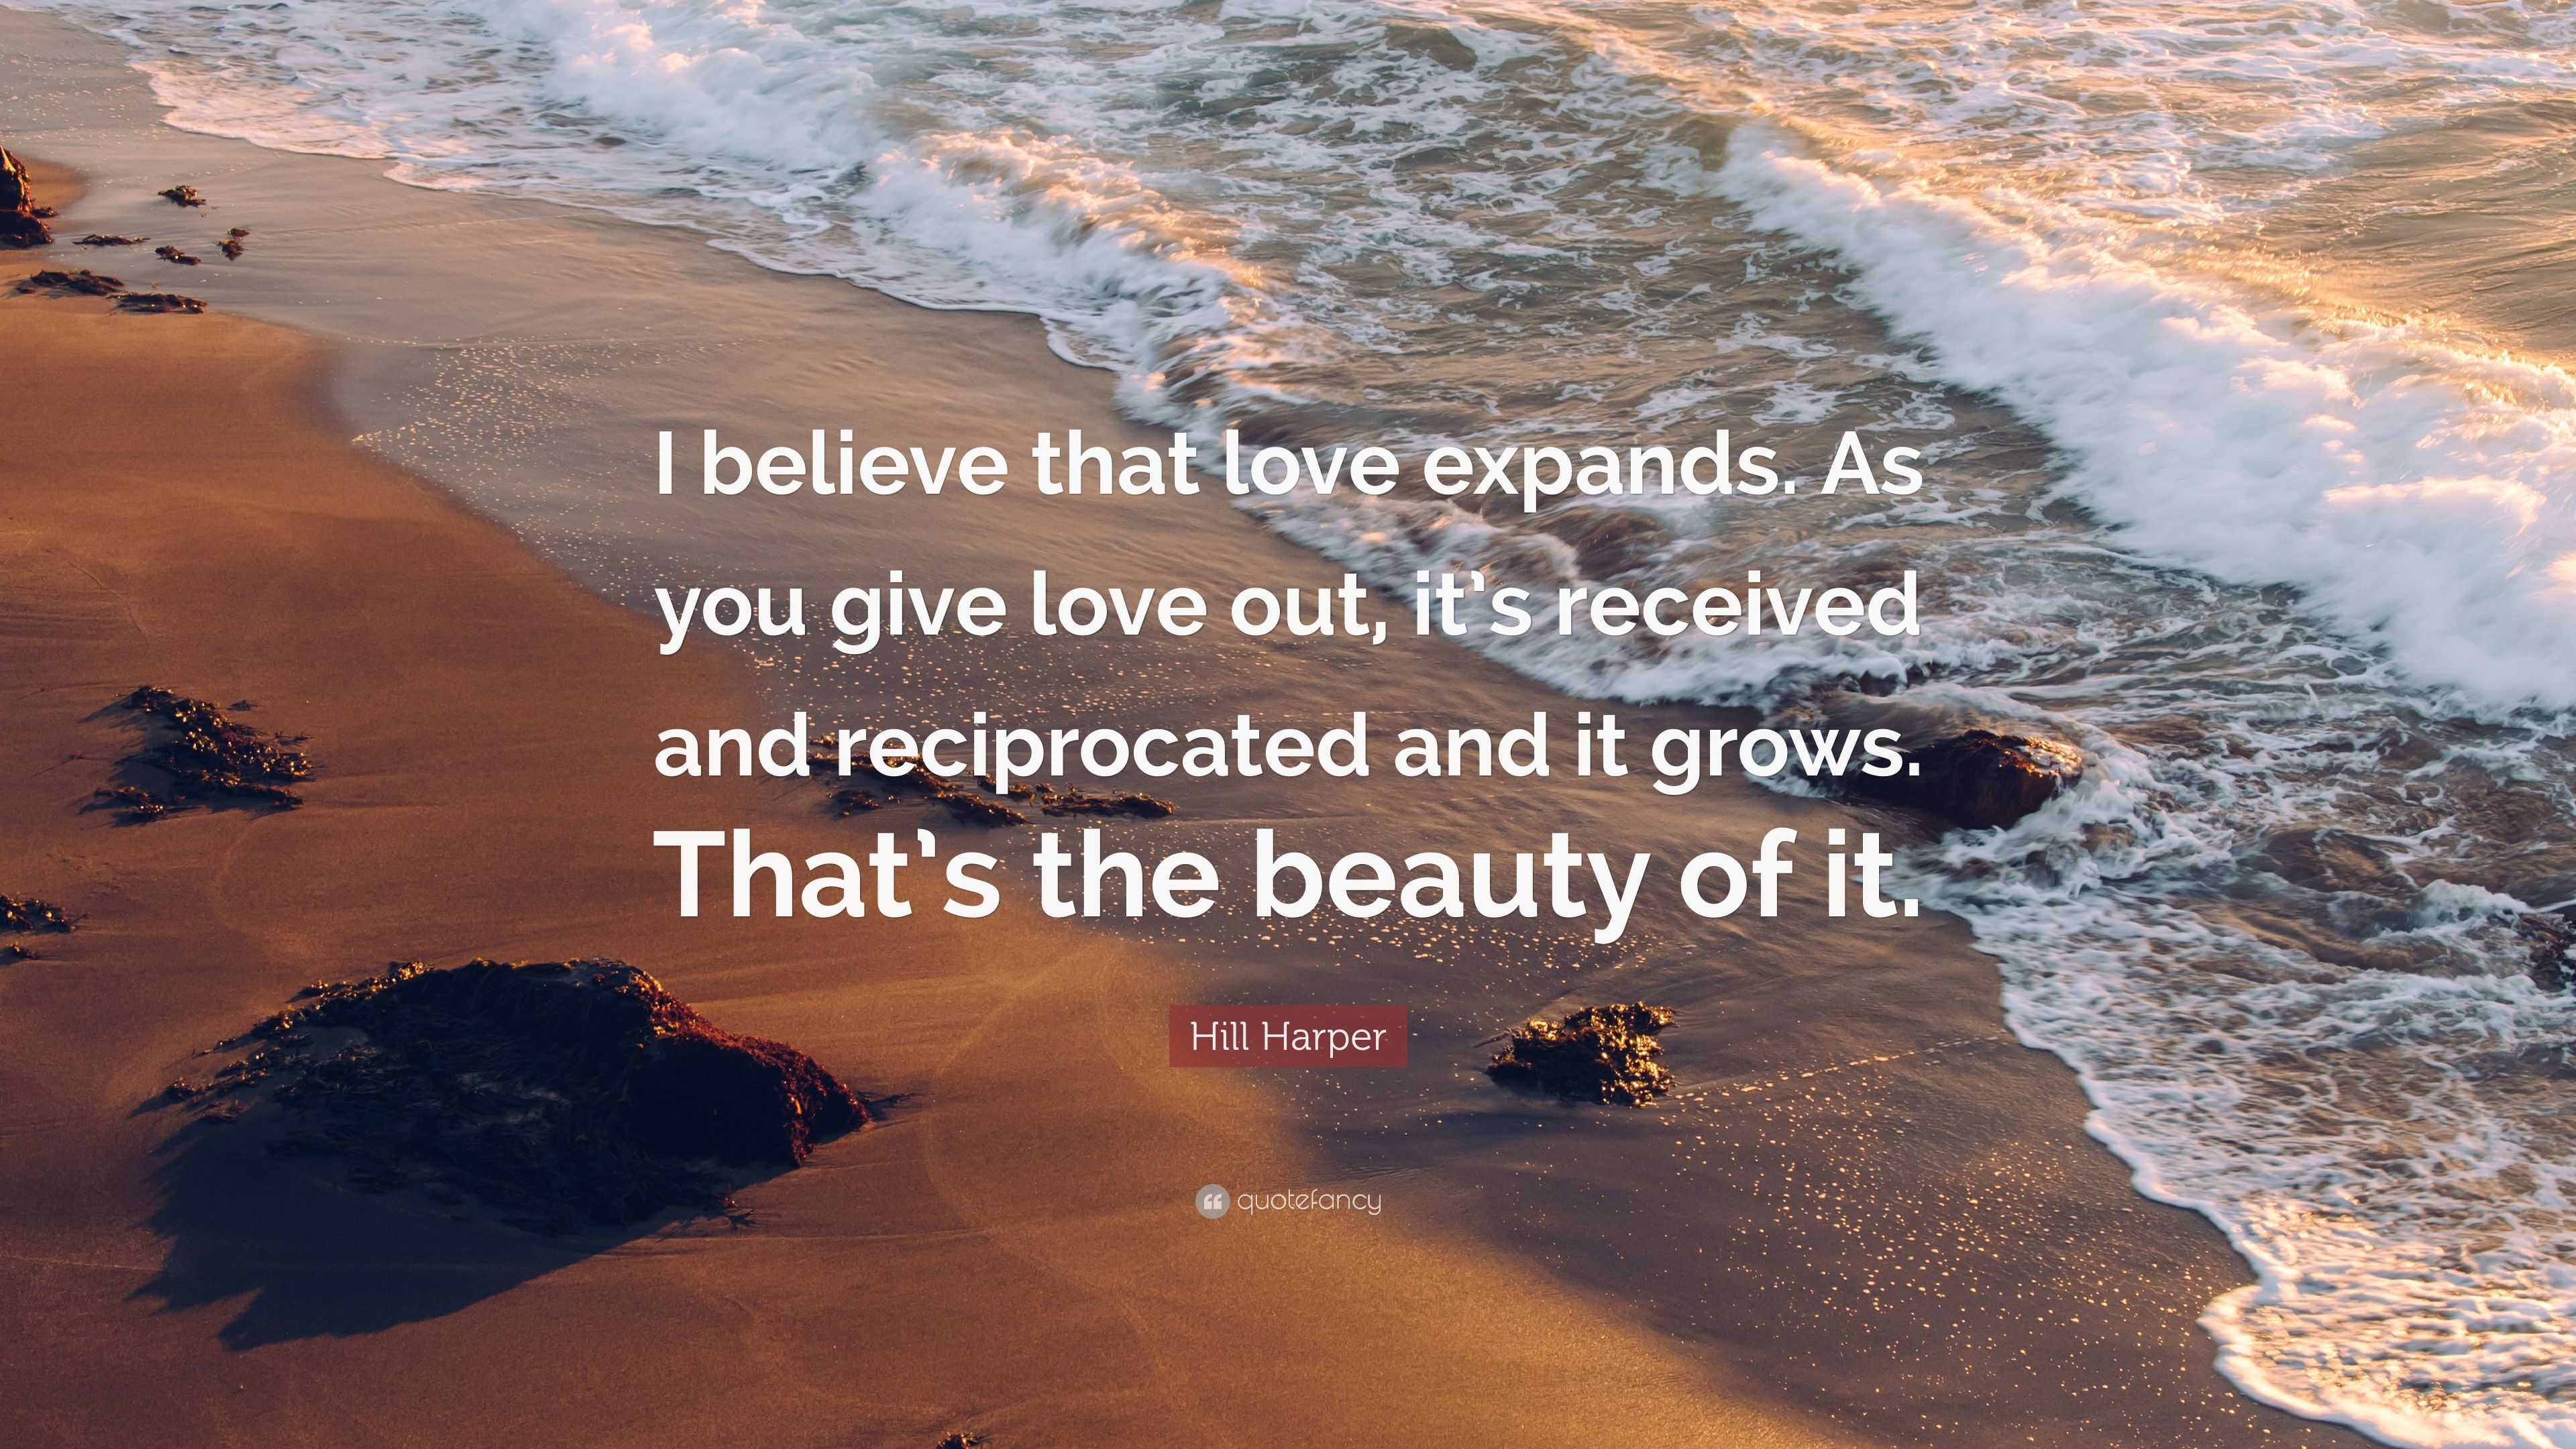 Hill Harper Quote: “I believe that love expands. As you give love out ...